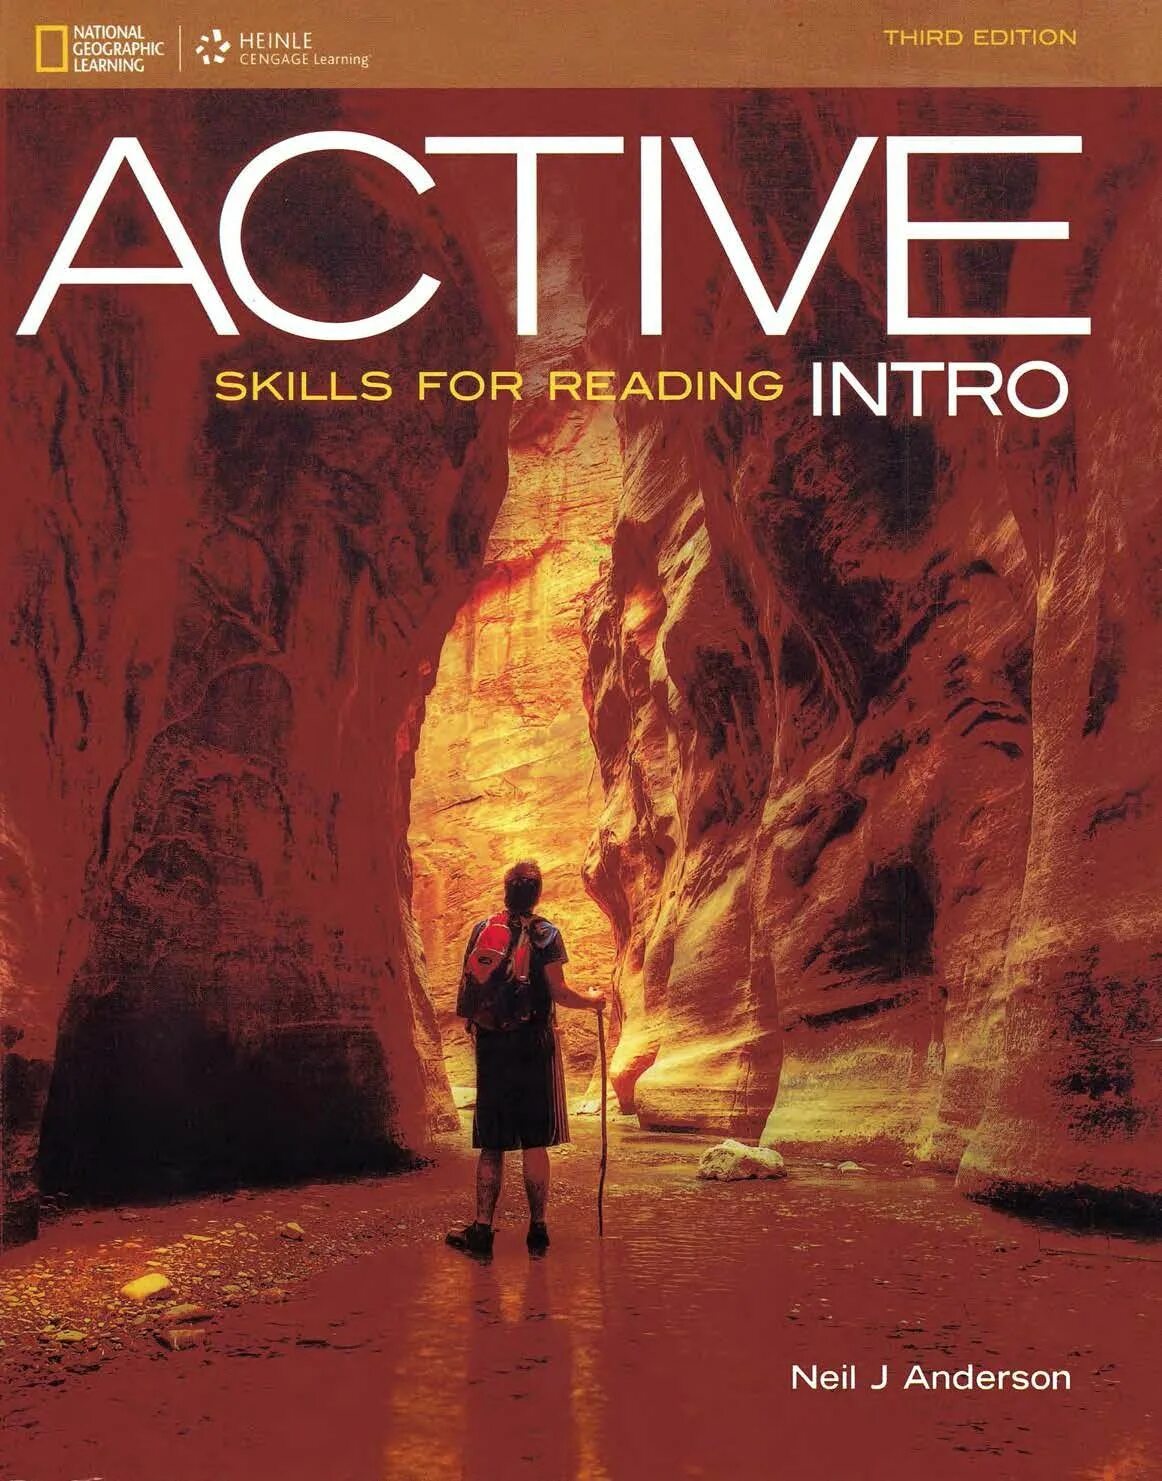 Active skills for reading Intro. Active skills for reading 1. Active skills for reading 4. Active skills for reading 3.